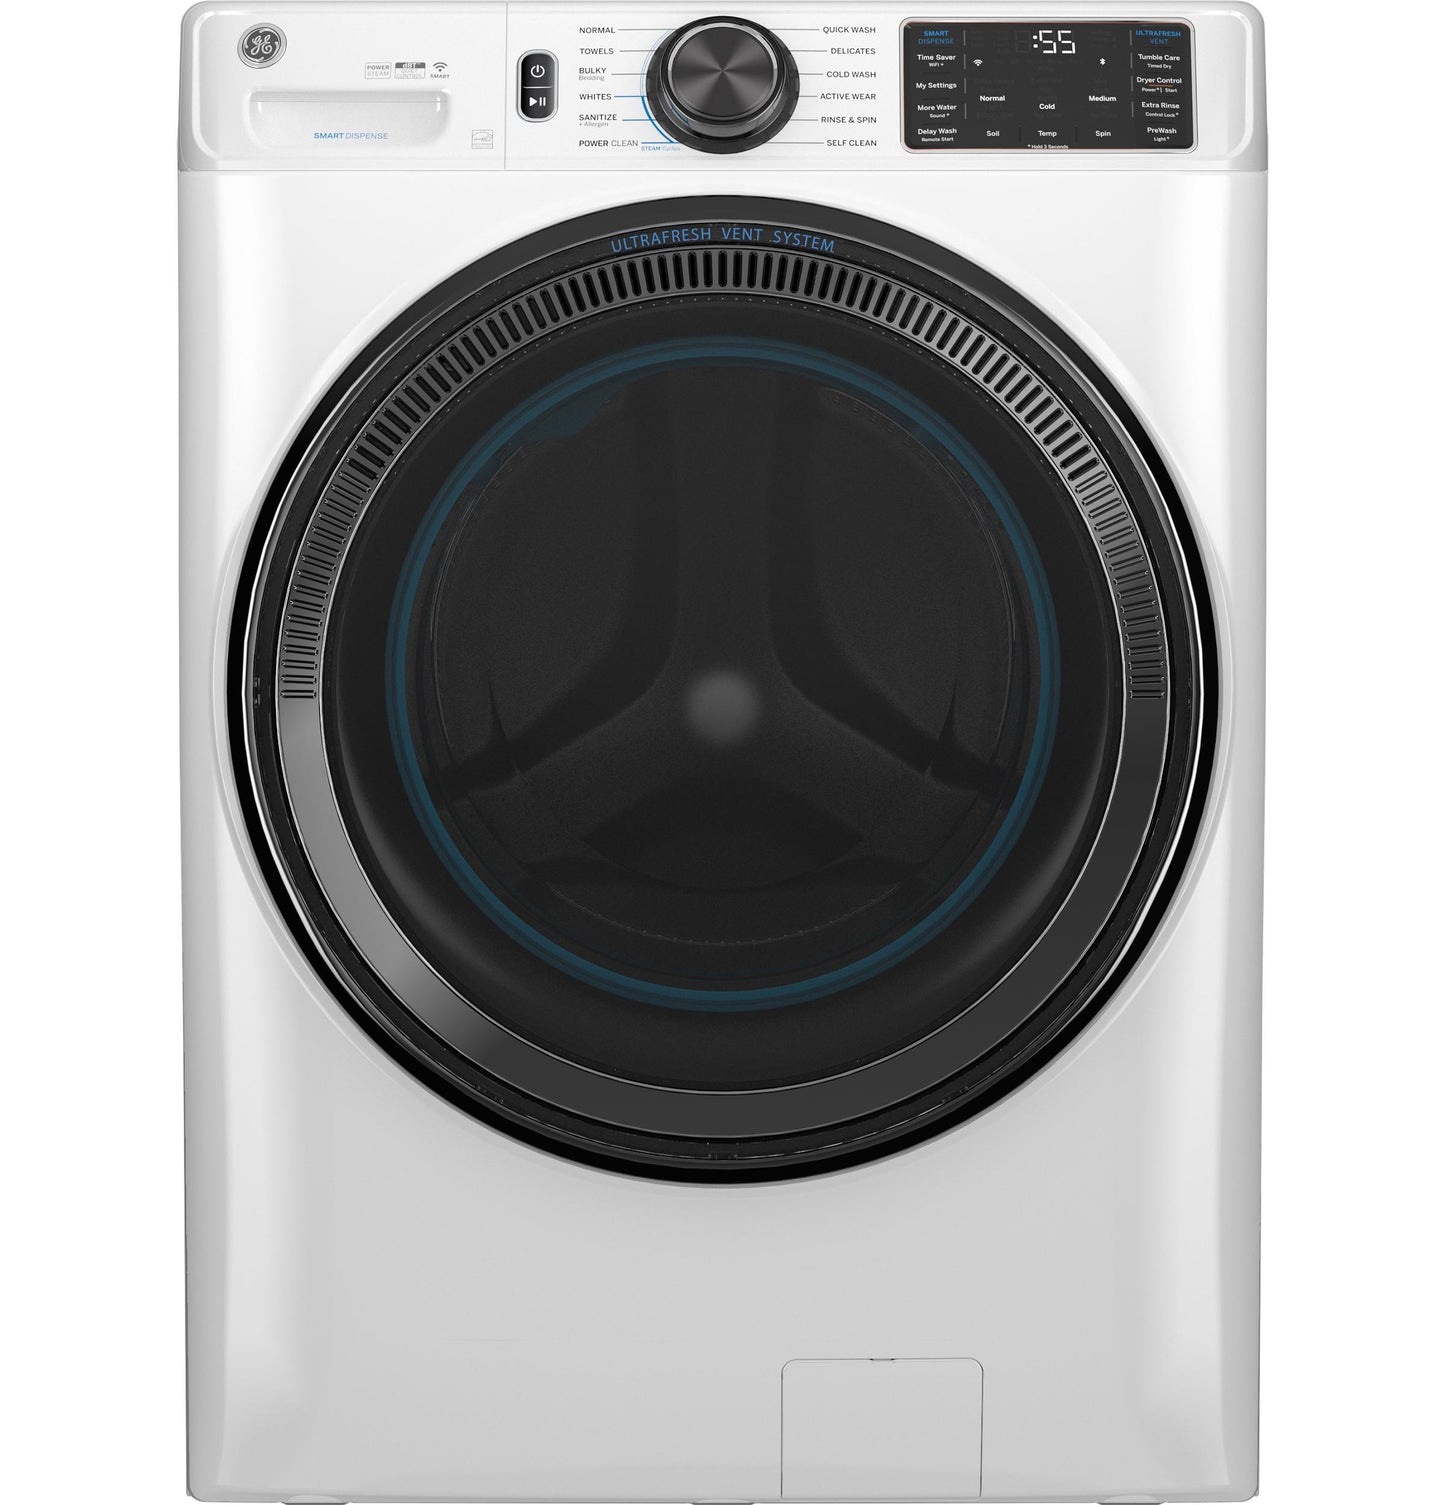 Ge Appliances GFW655SSVWW Ge® 5.0 Cu. Ft. Capacity Smart Front Load Energy Star® Steam Washer With Smartdispense&#8482; Ultrafresh Vent System With Odorblock&#8482; And Sanitize + Allergen